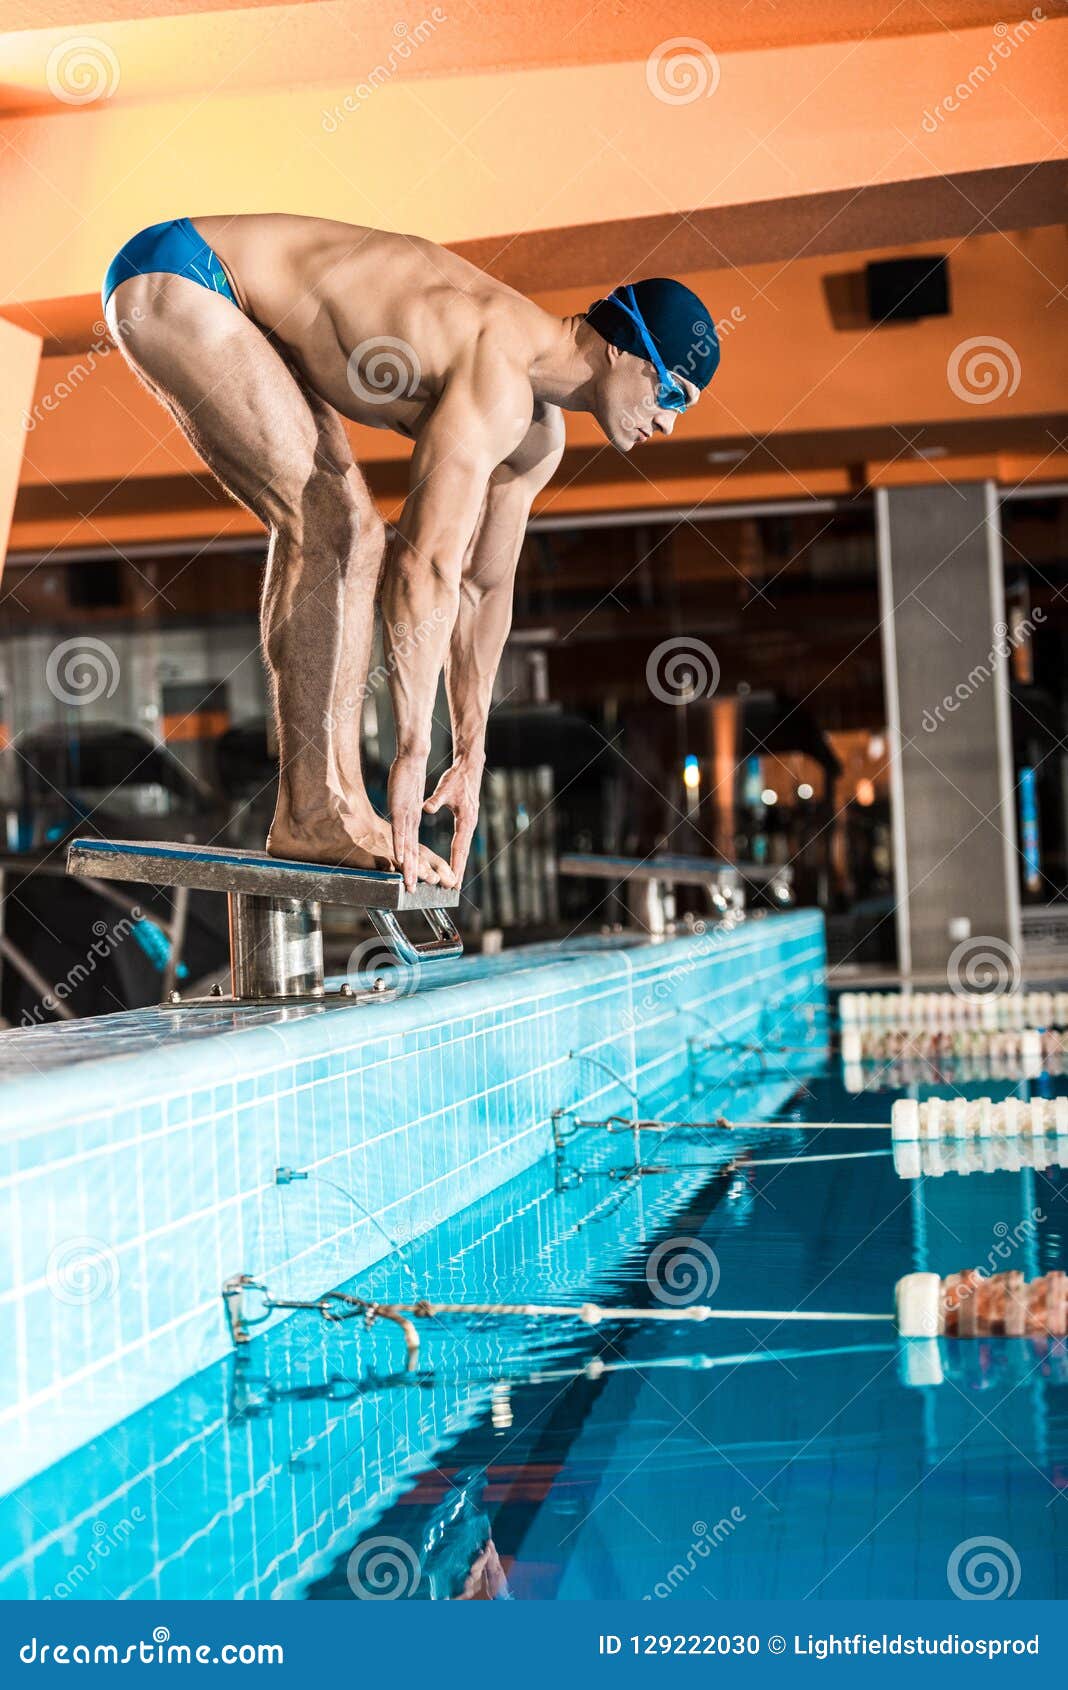 Swimmer Standing on Diving Board Ready To Jump into Competition